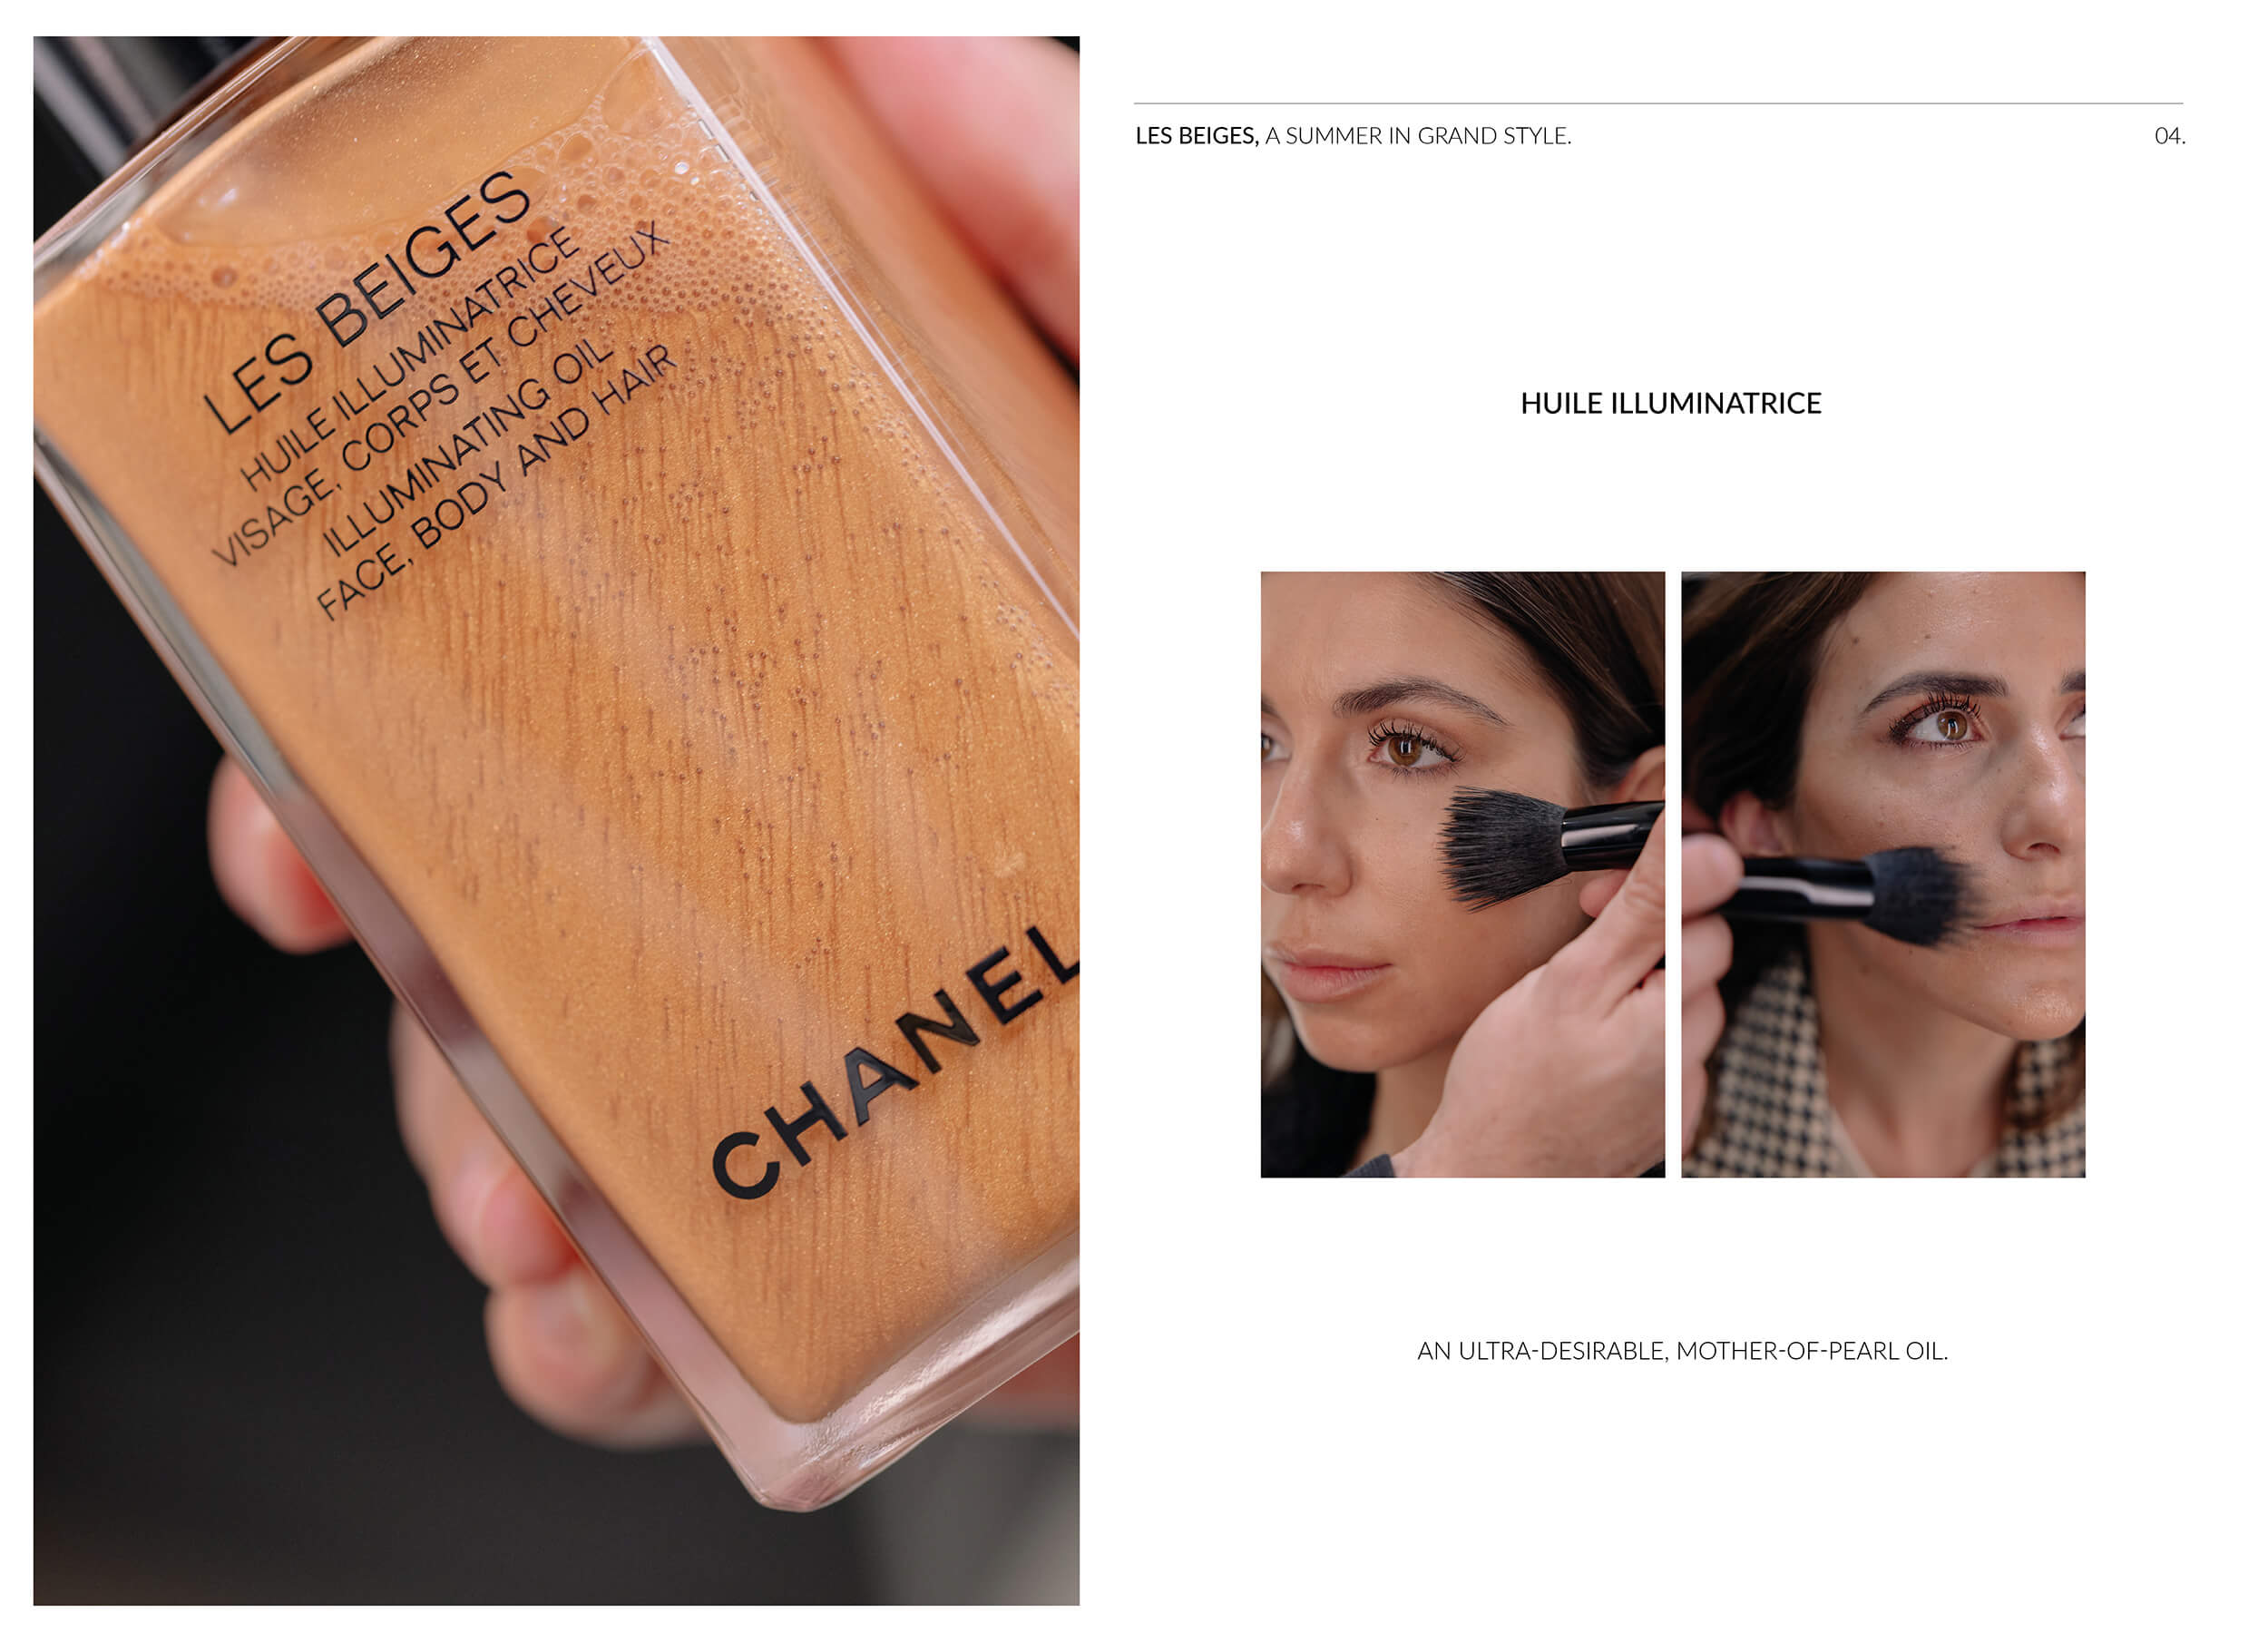 Chanel Les Beiges 2022: This Summer's Makeup – The Italian Rêve